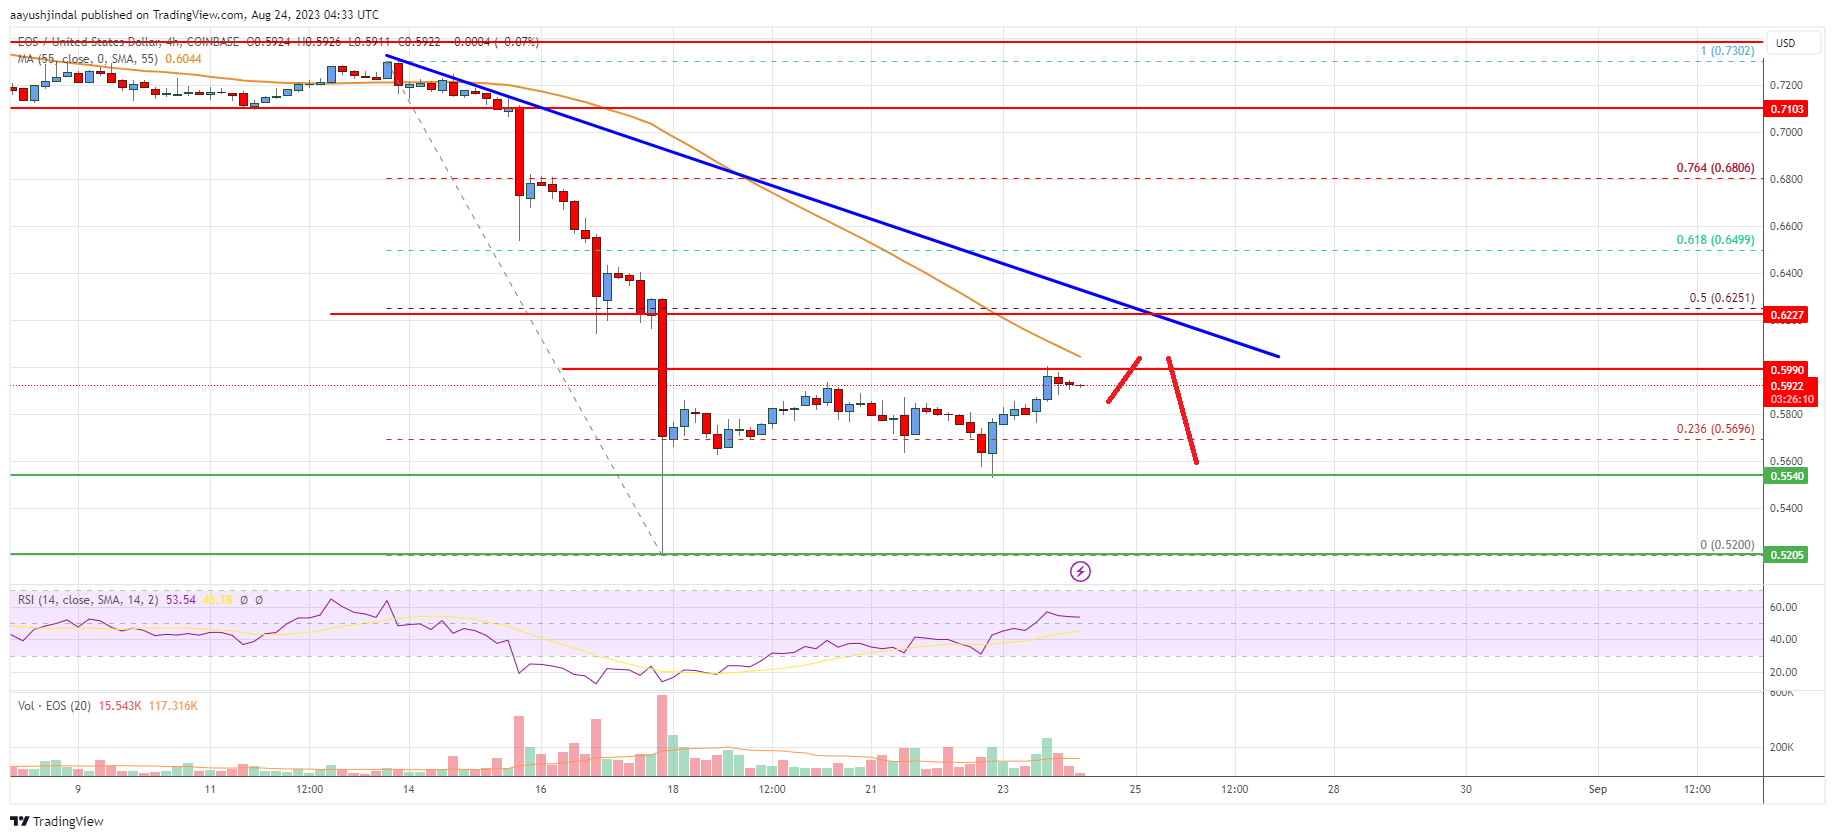 EOS Price Analysis: Upsides Could Be Capped Near $0.625